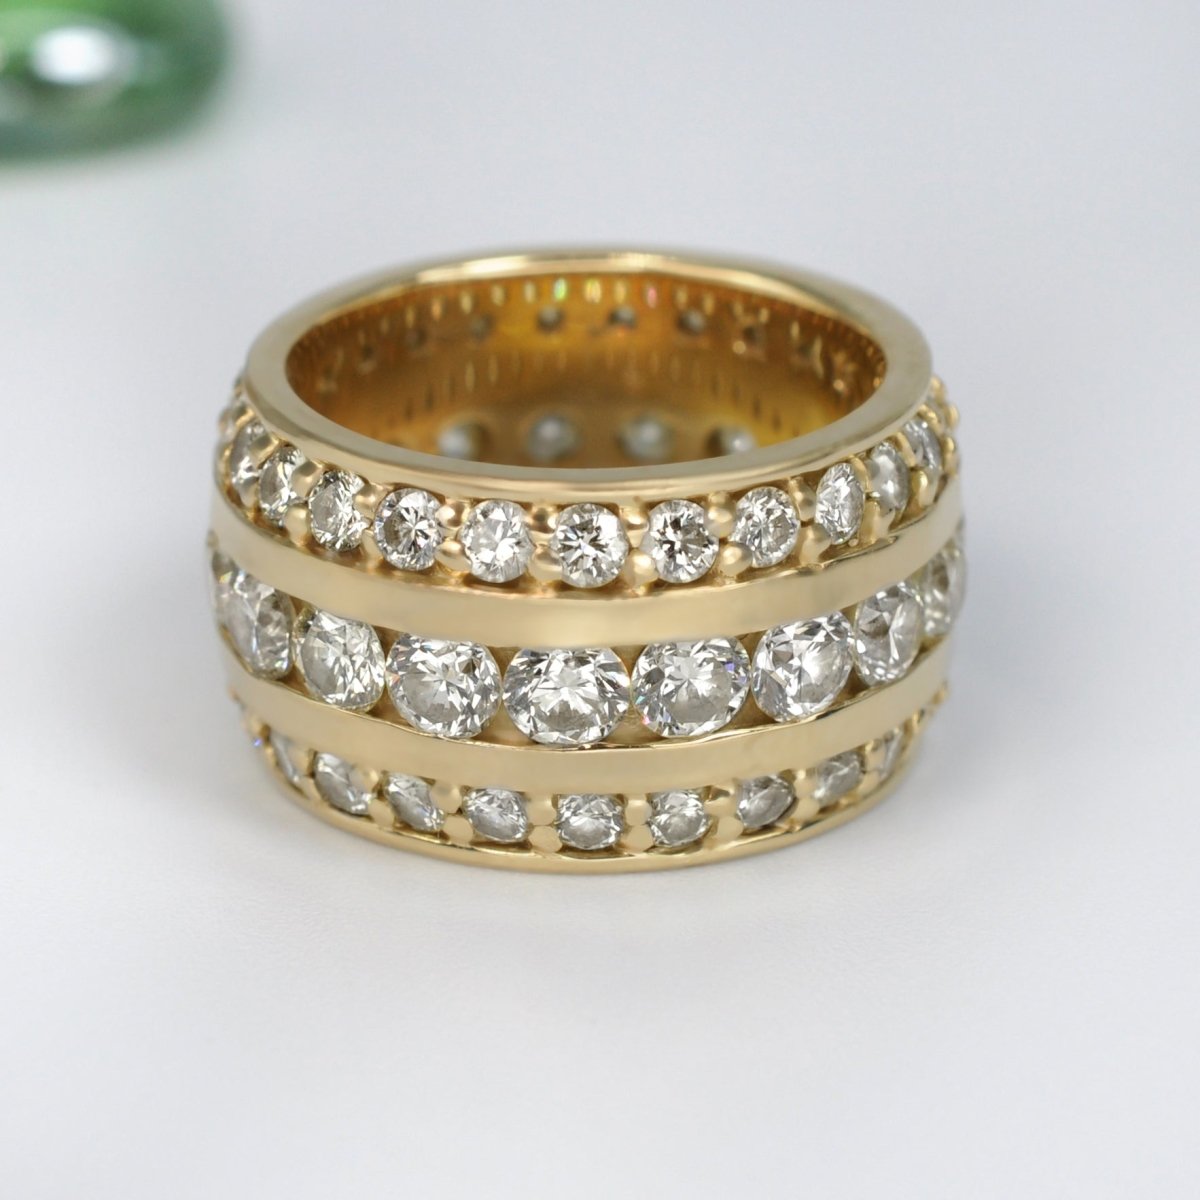 Certified 6.00 CT Round Cut Diamond Eternity Ring in 14KT Yellow Gold - Primestyle.com